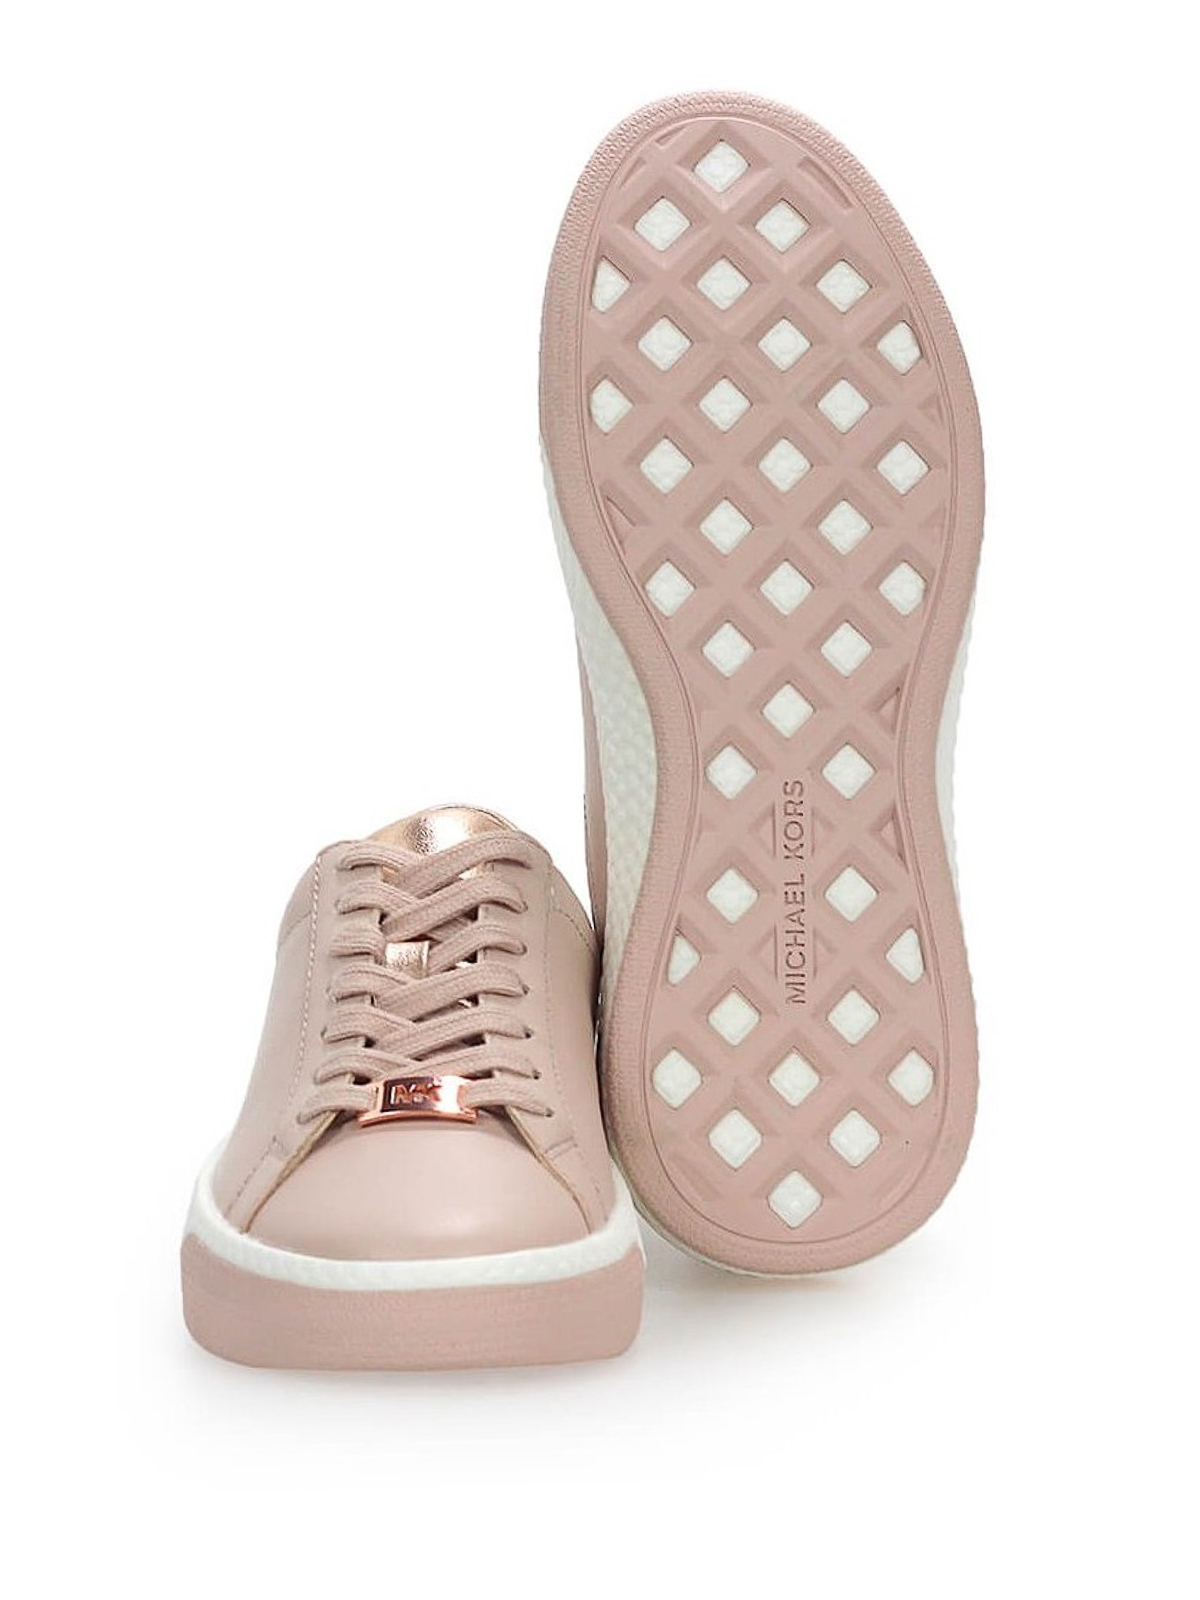 Trainers Michael Kors - Light pink leather sneakers - 43T9CEFS1L549